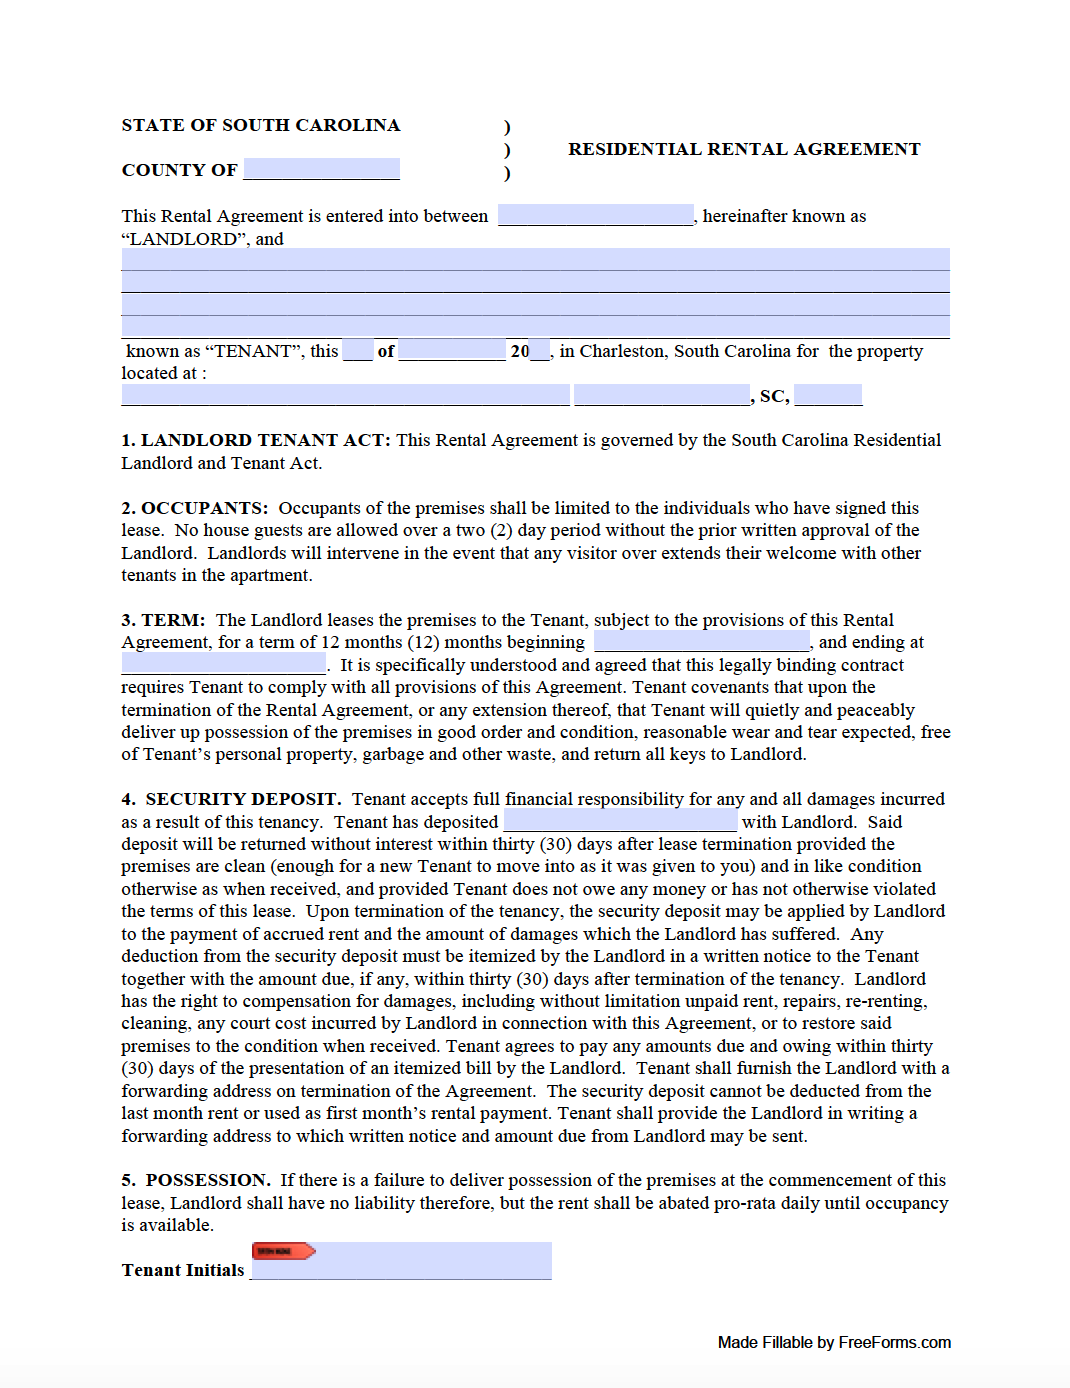 Free South Carolina Standard Residential Lease Agreement Template PDF